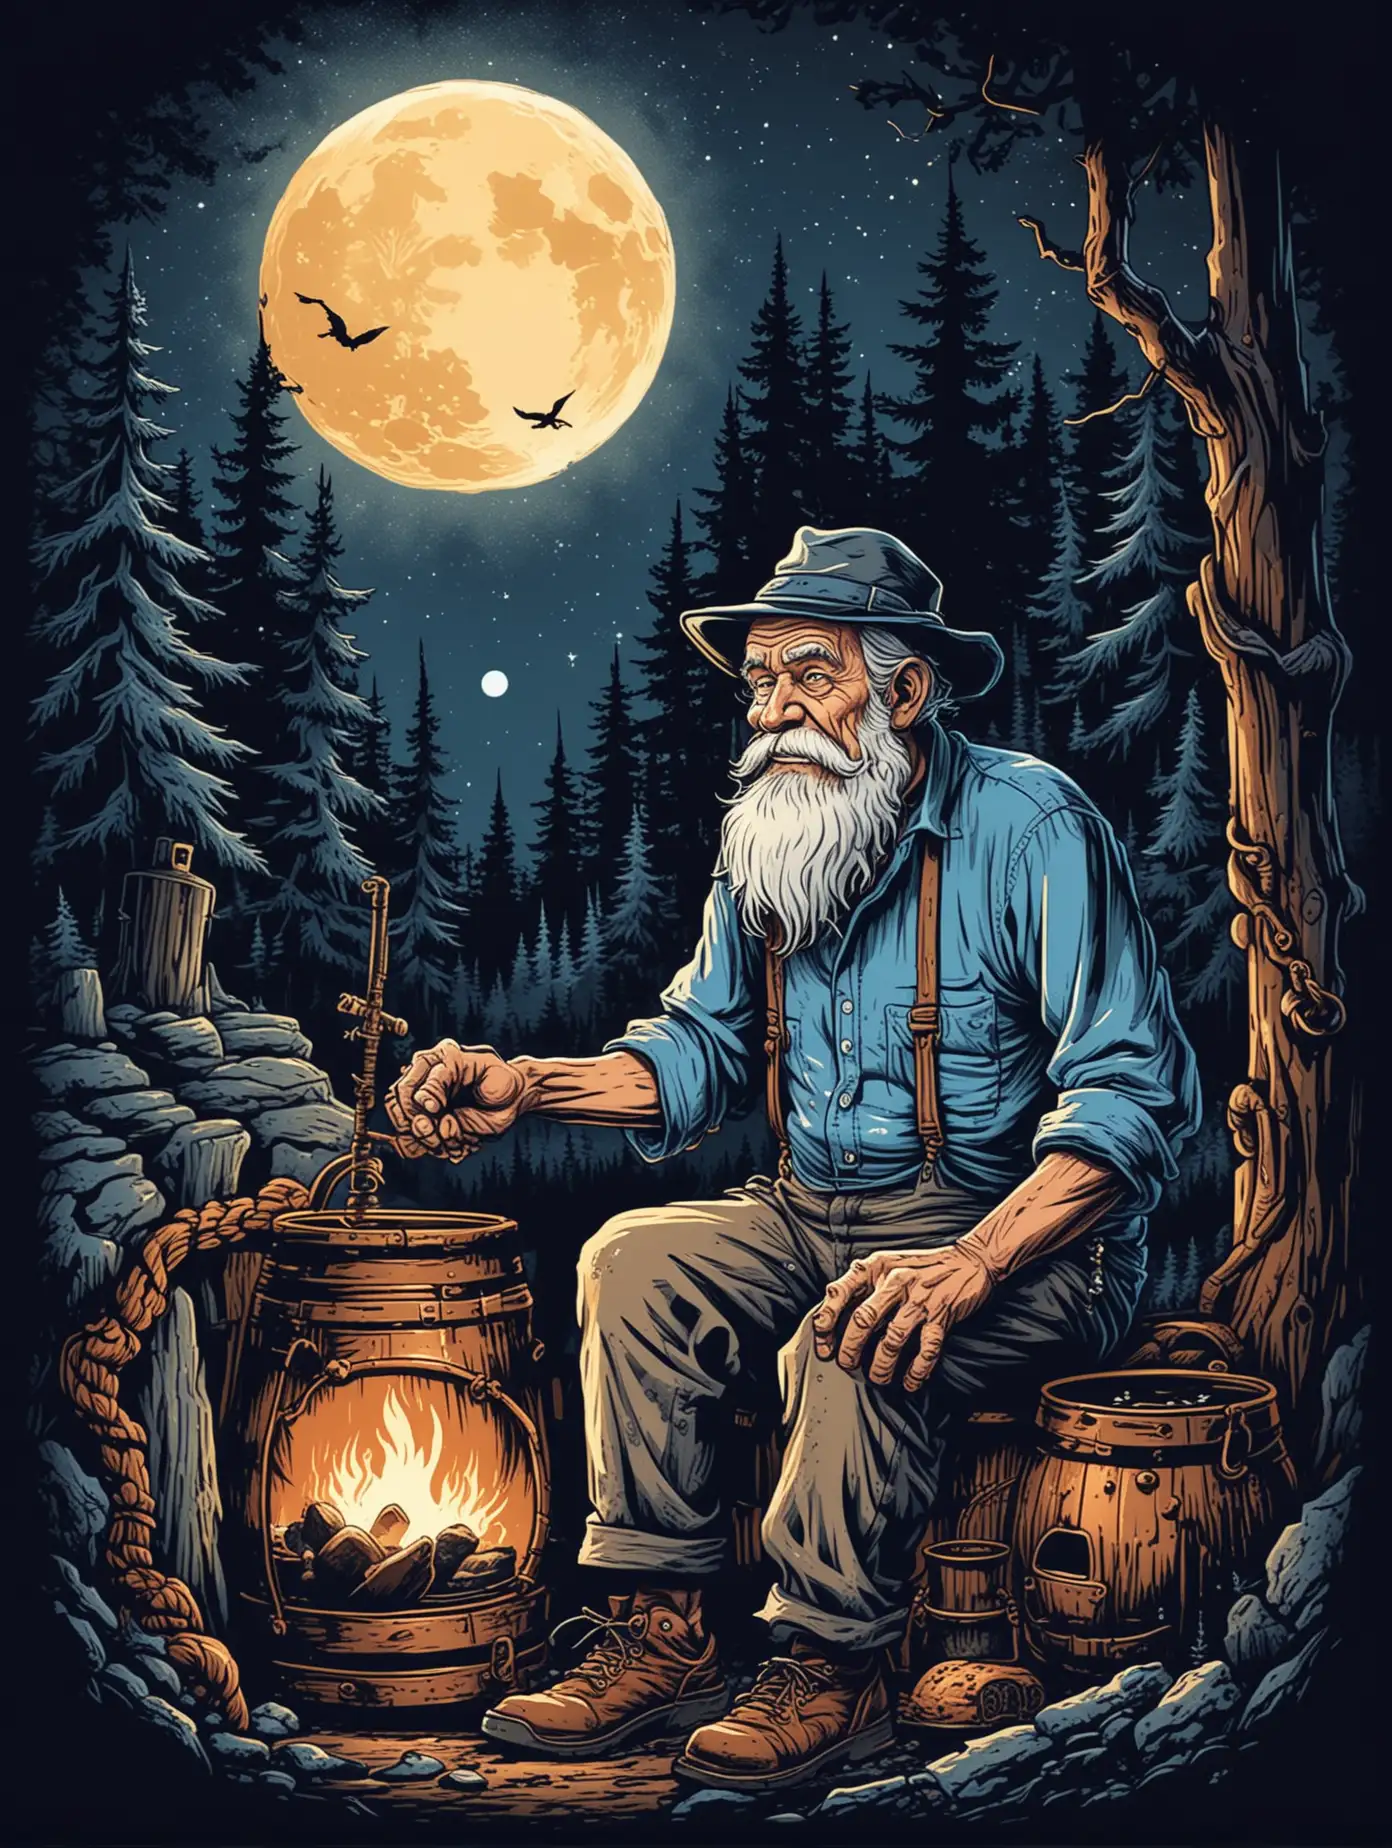 Quirky Moonshiner Cartoon Design with Bigfoot in Nighttime Setting